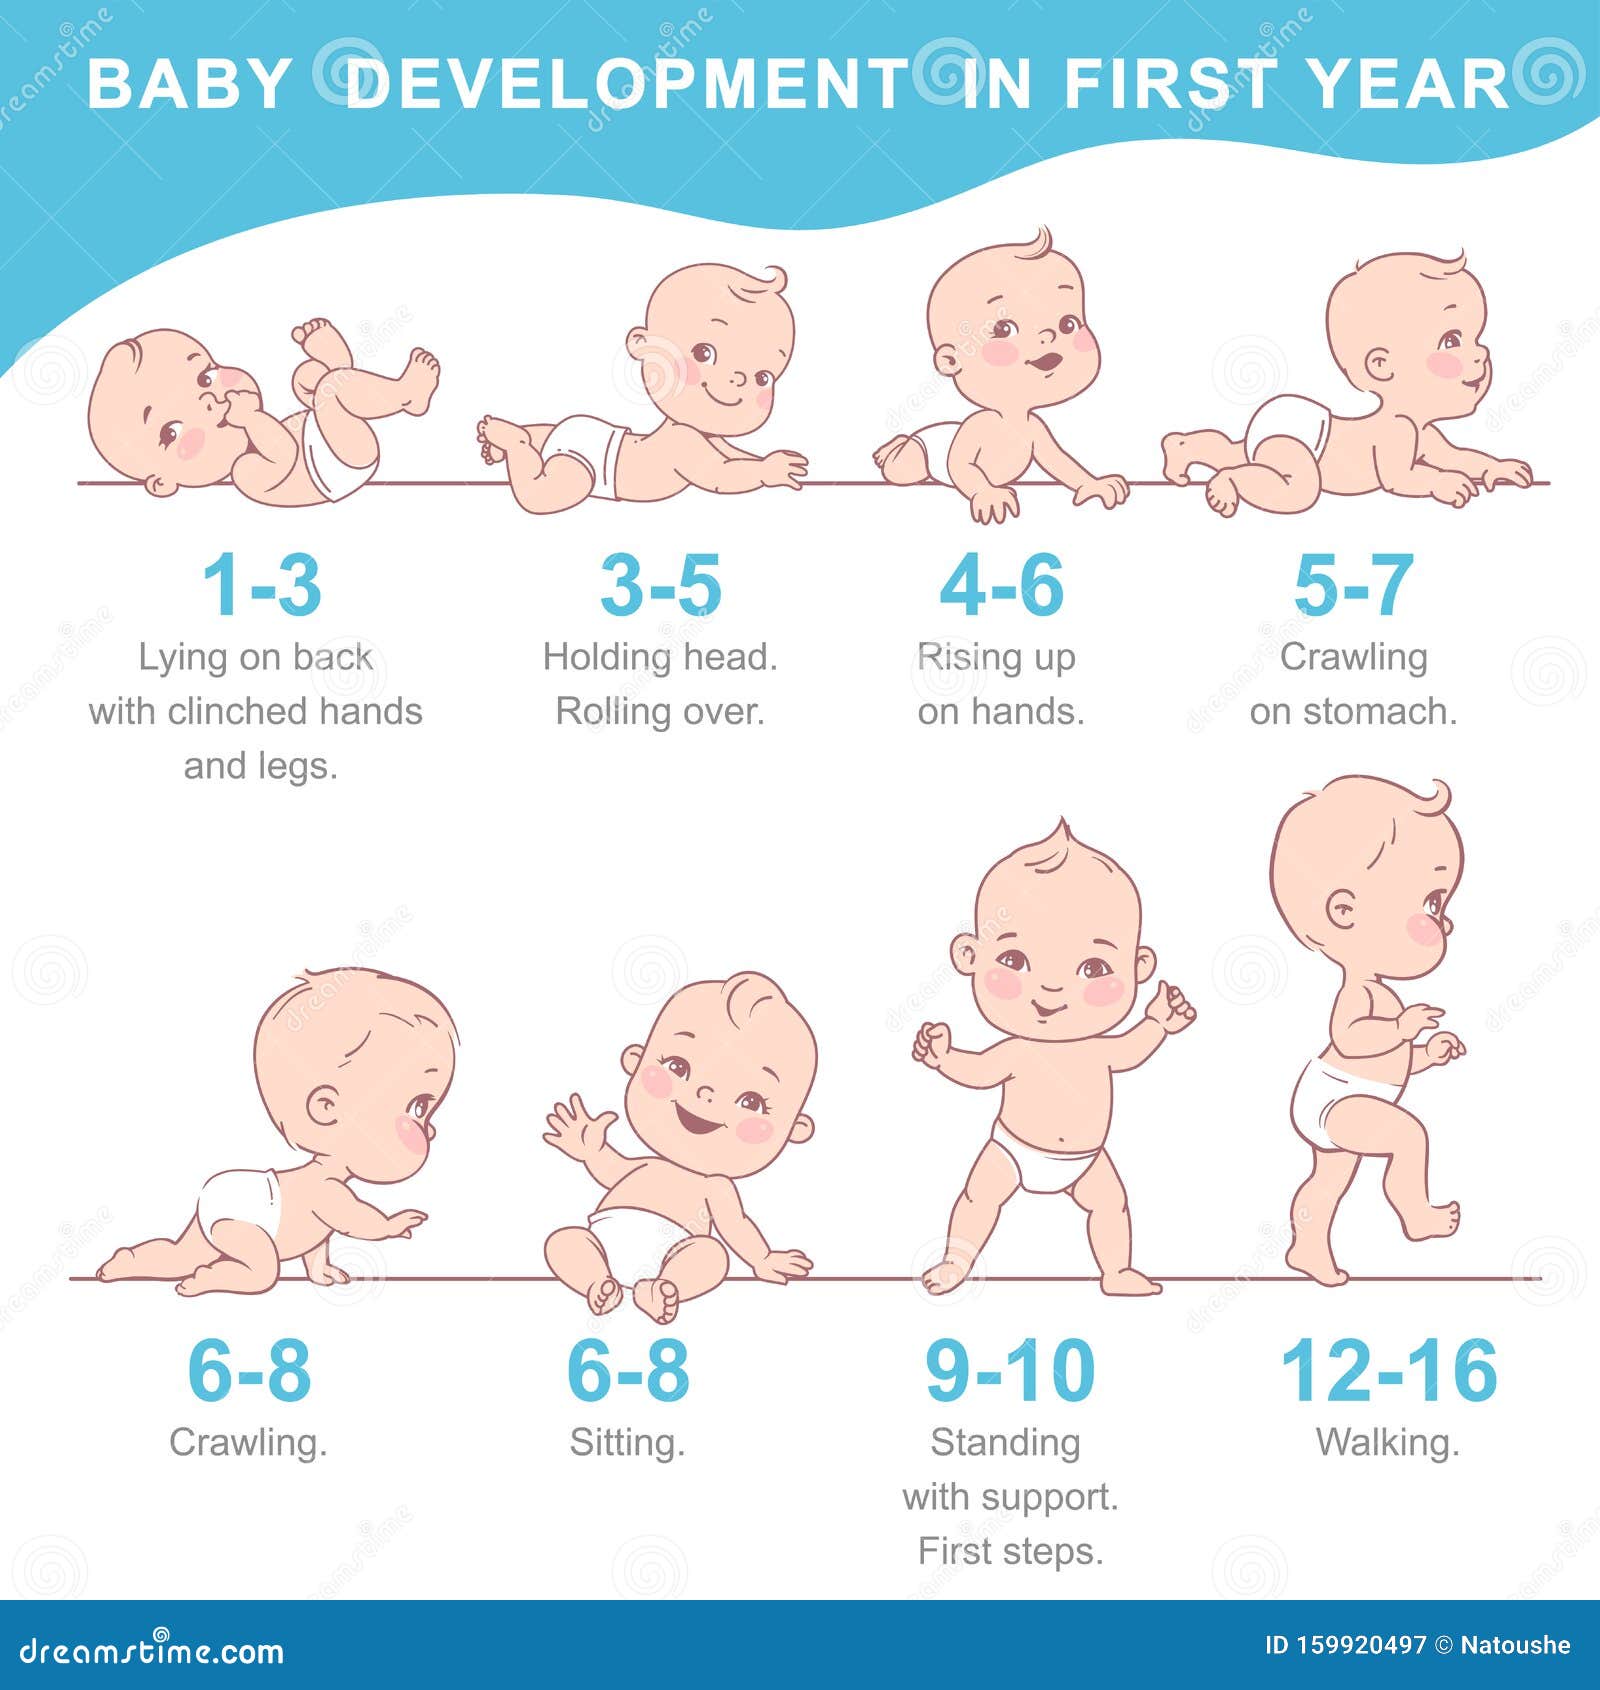 Growth And Development Of A Baby: Understanding Your Little One’s Milestones